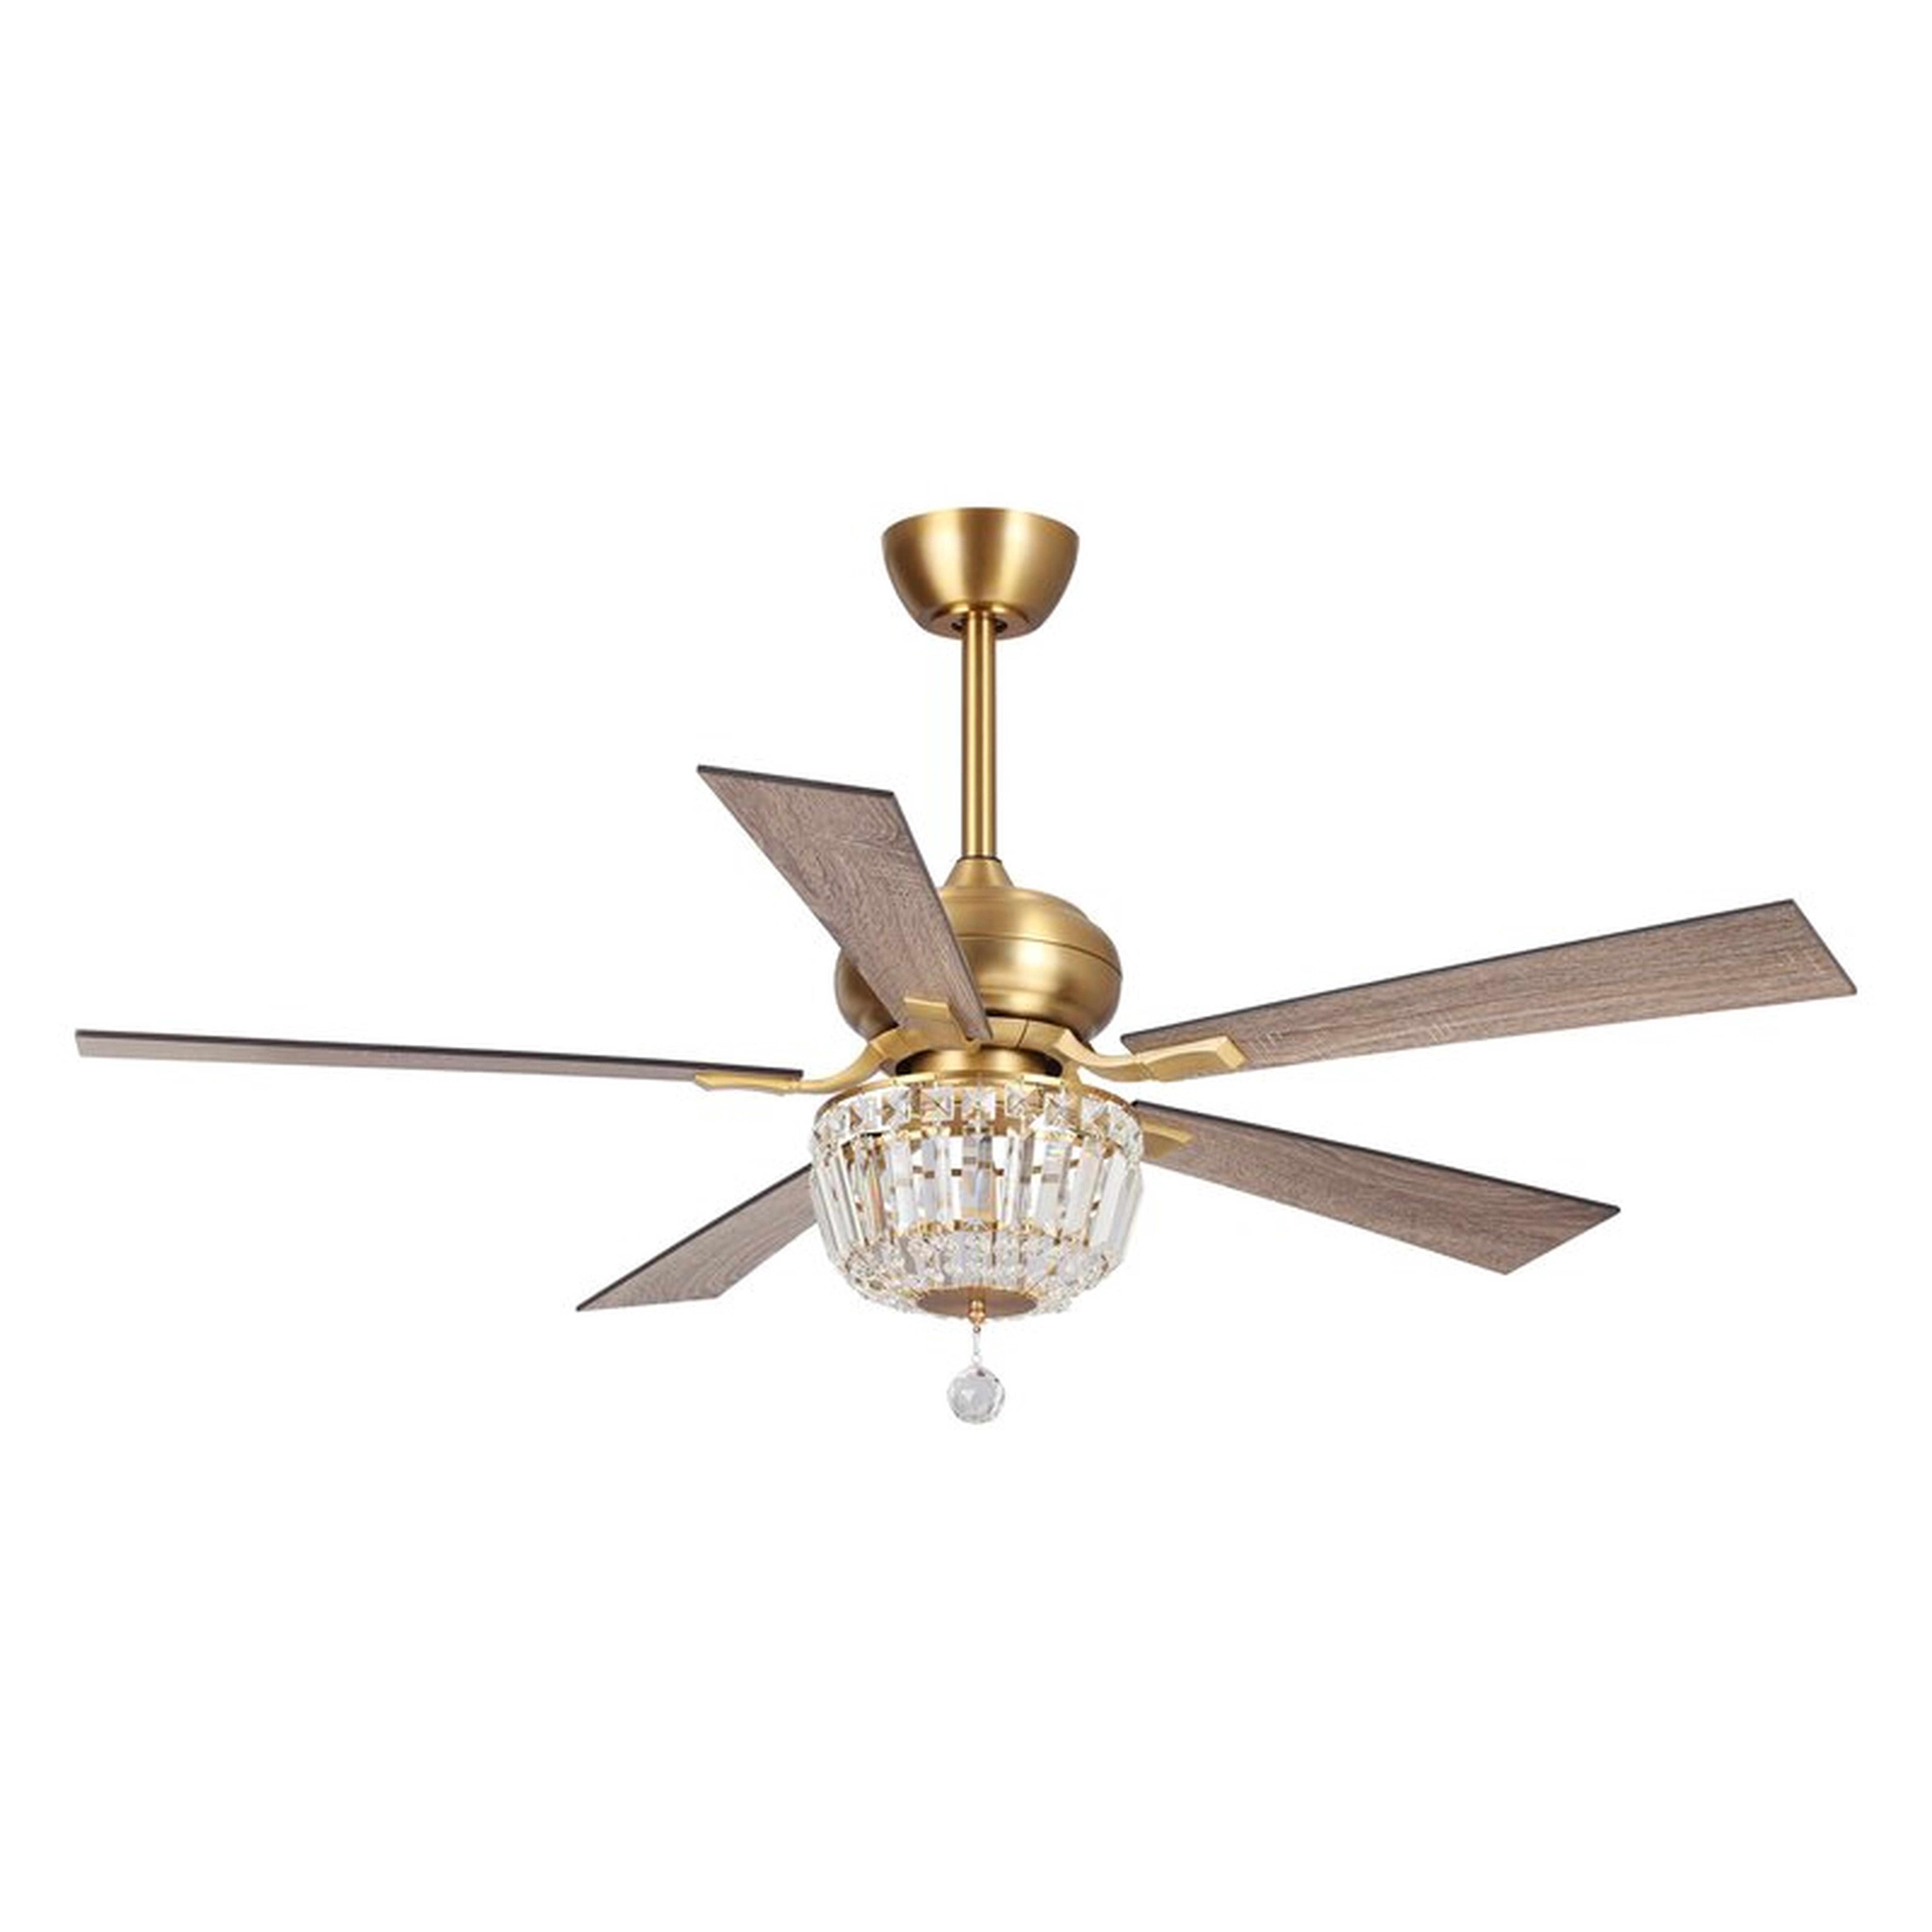 52'' Winne 5 - Blade Crystal Ceiling Fan with Remote Control and Light Kit Included - Wayfair